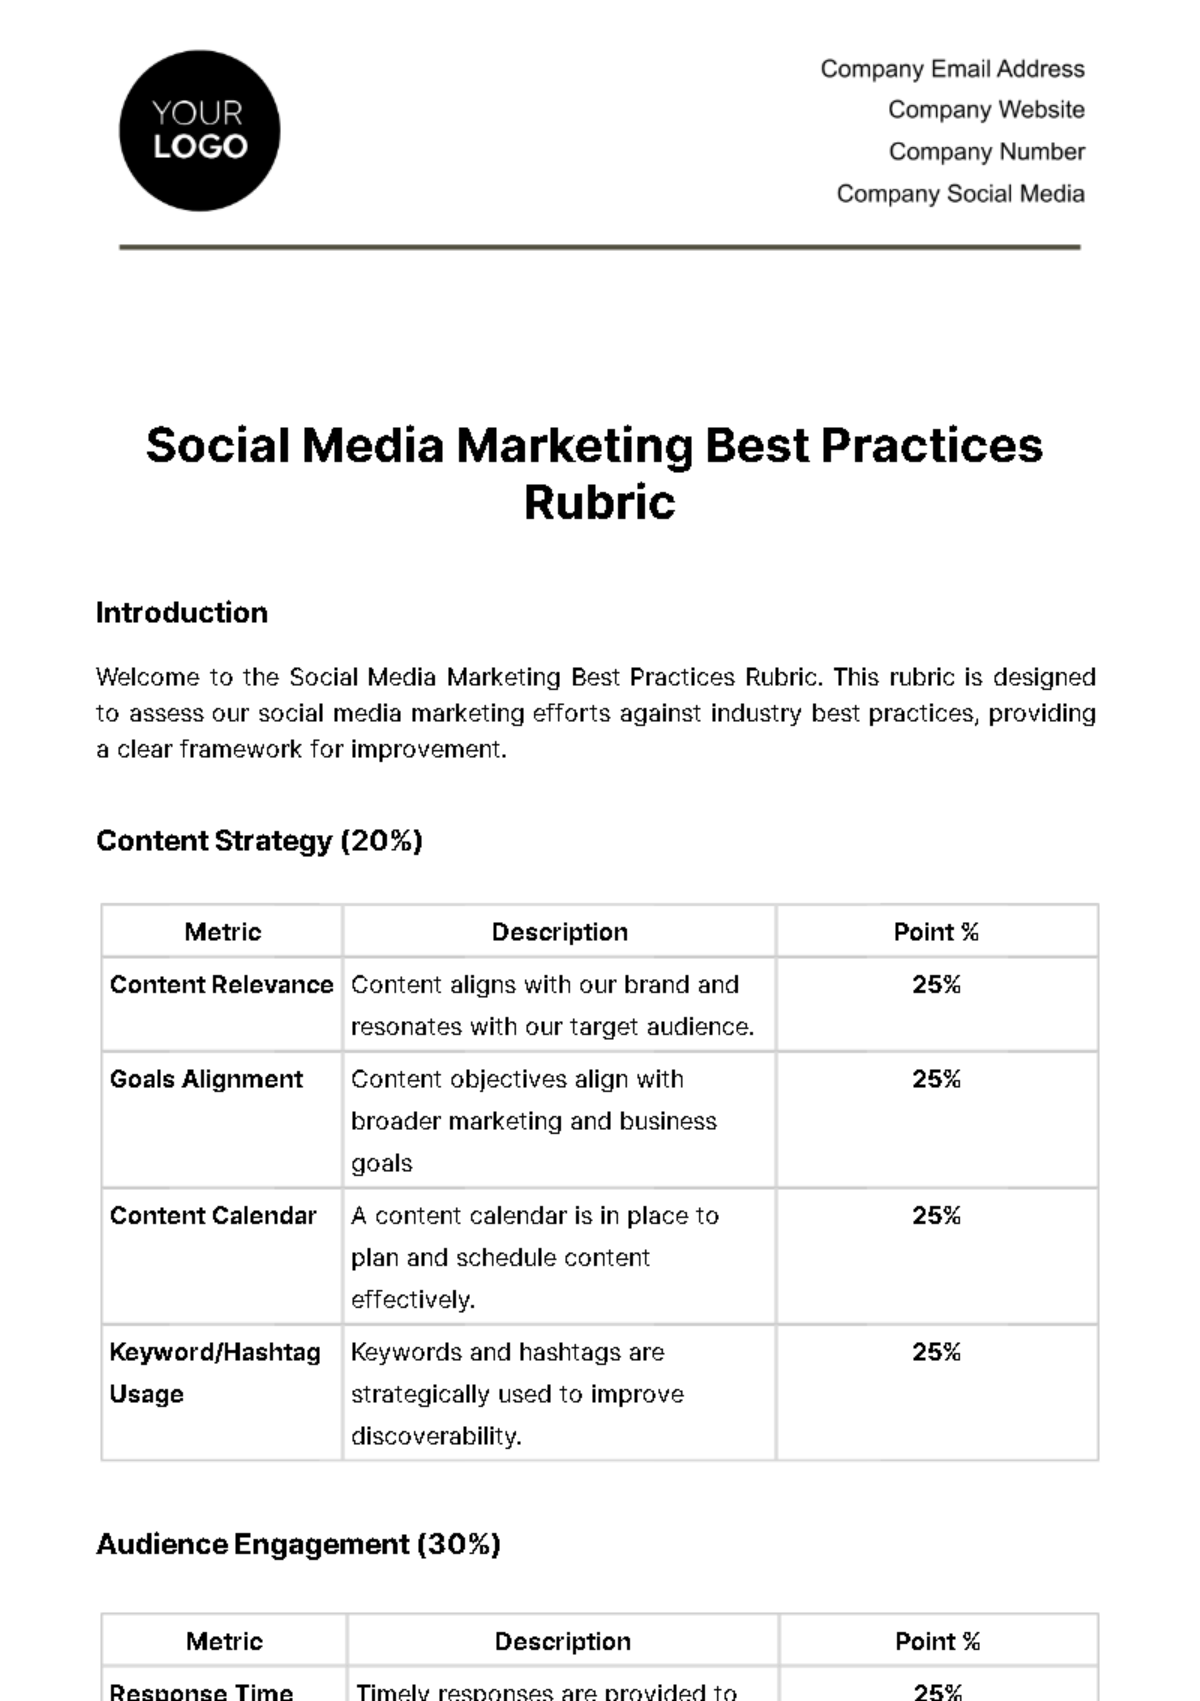 Social Media Marketing Best Practices Rubric Template